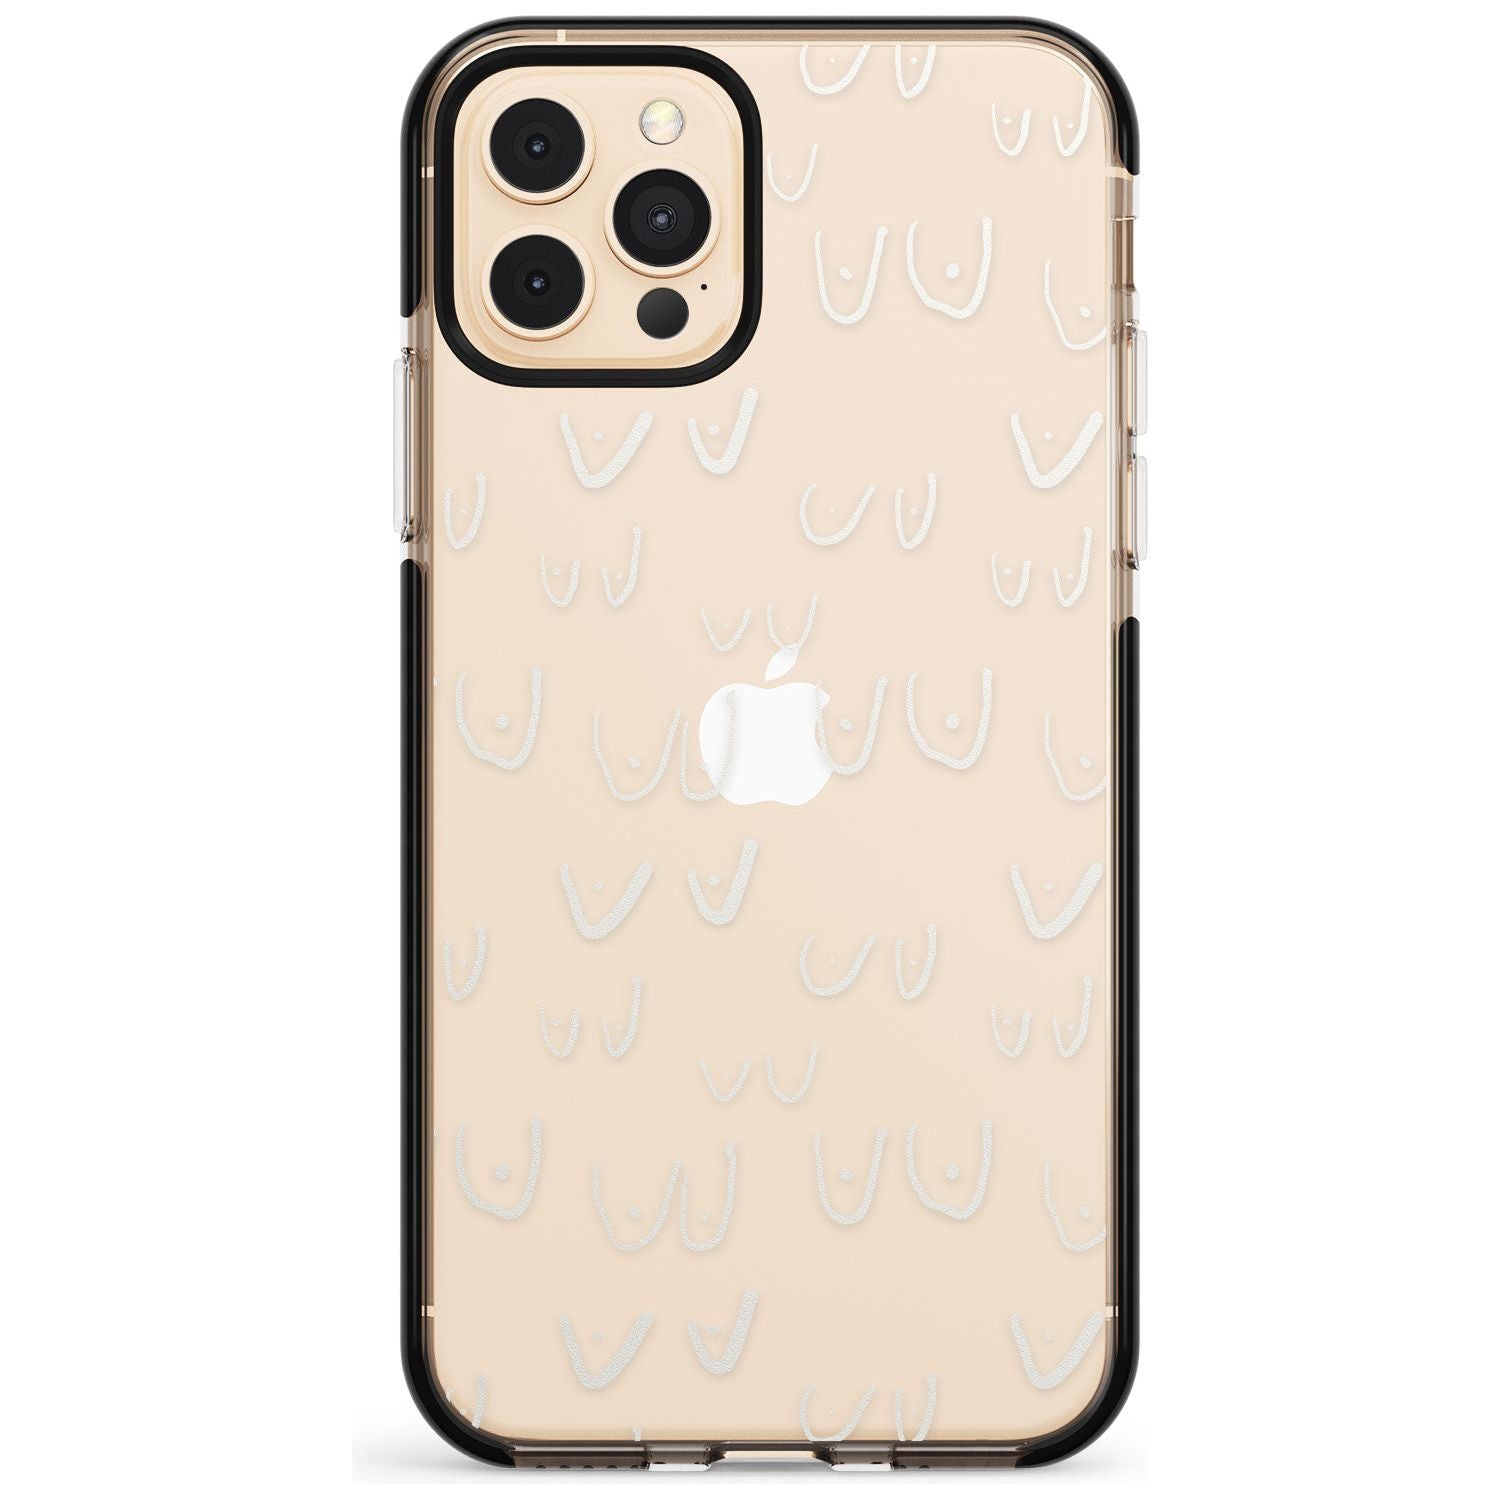 Boob Pattern (White) Pink Fade Impact Phone Case for iPhone 11